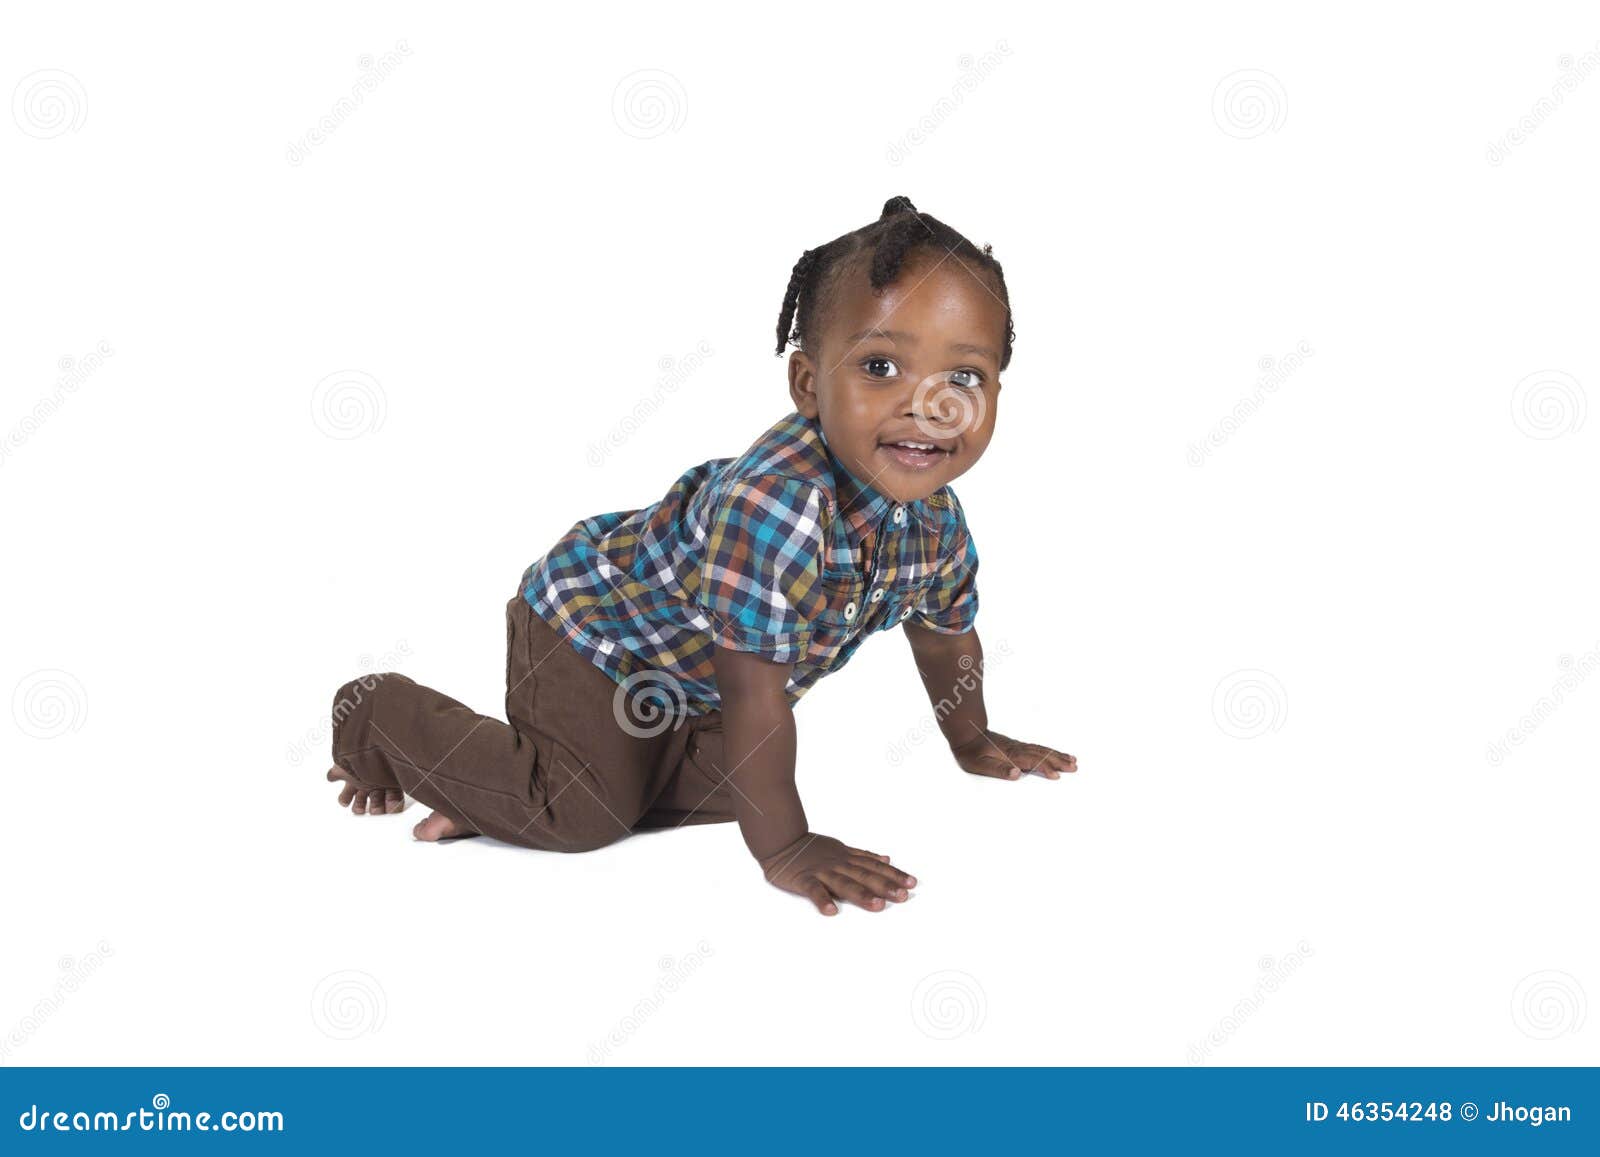 young toddler  against a white background